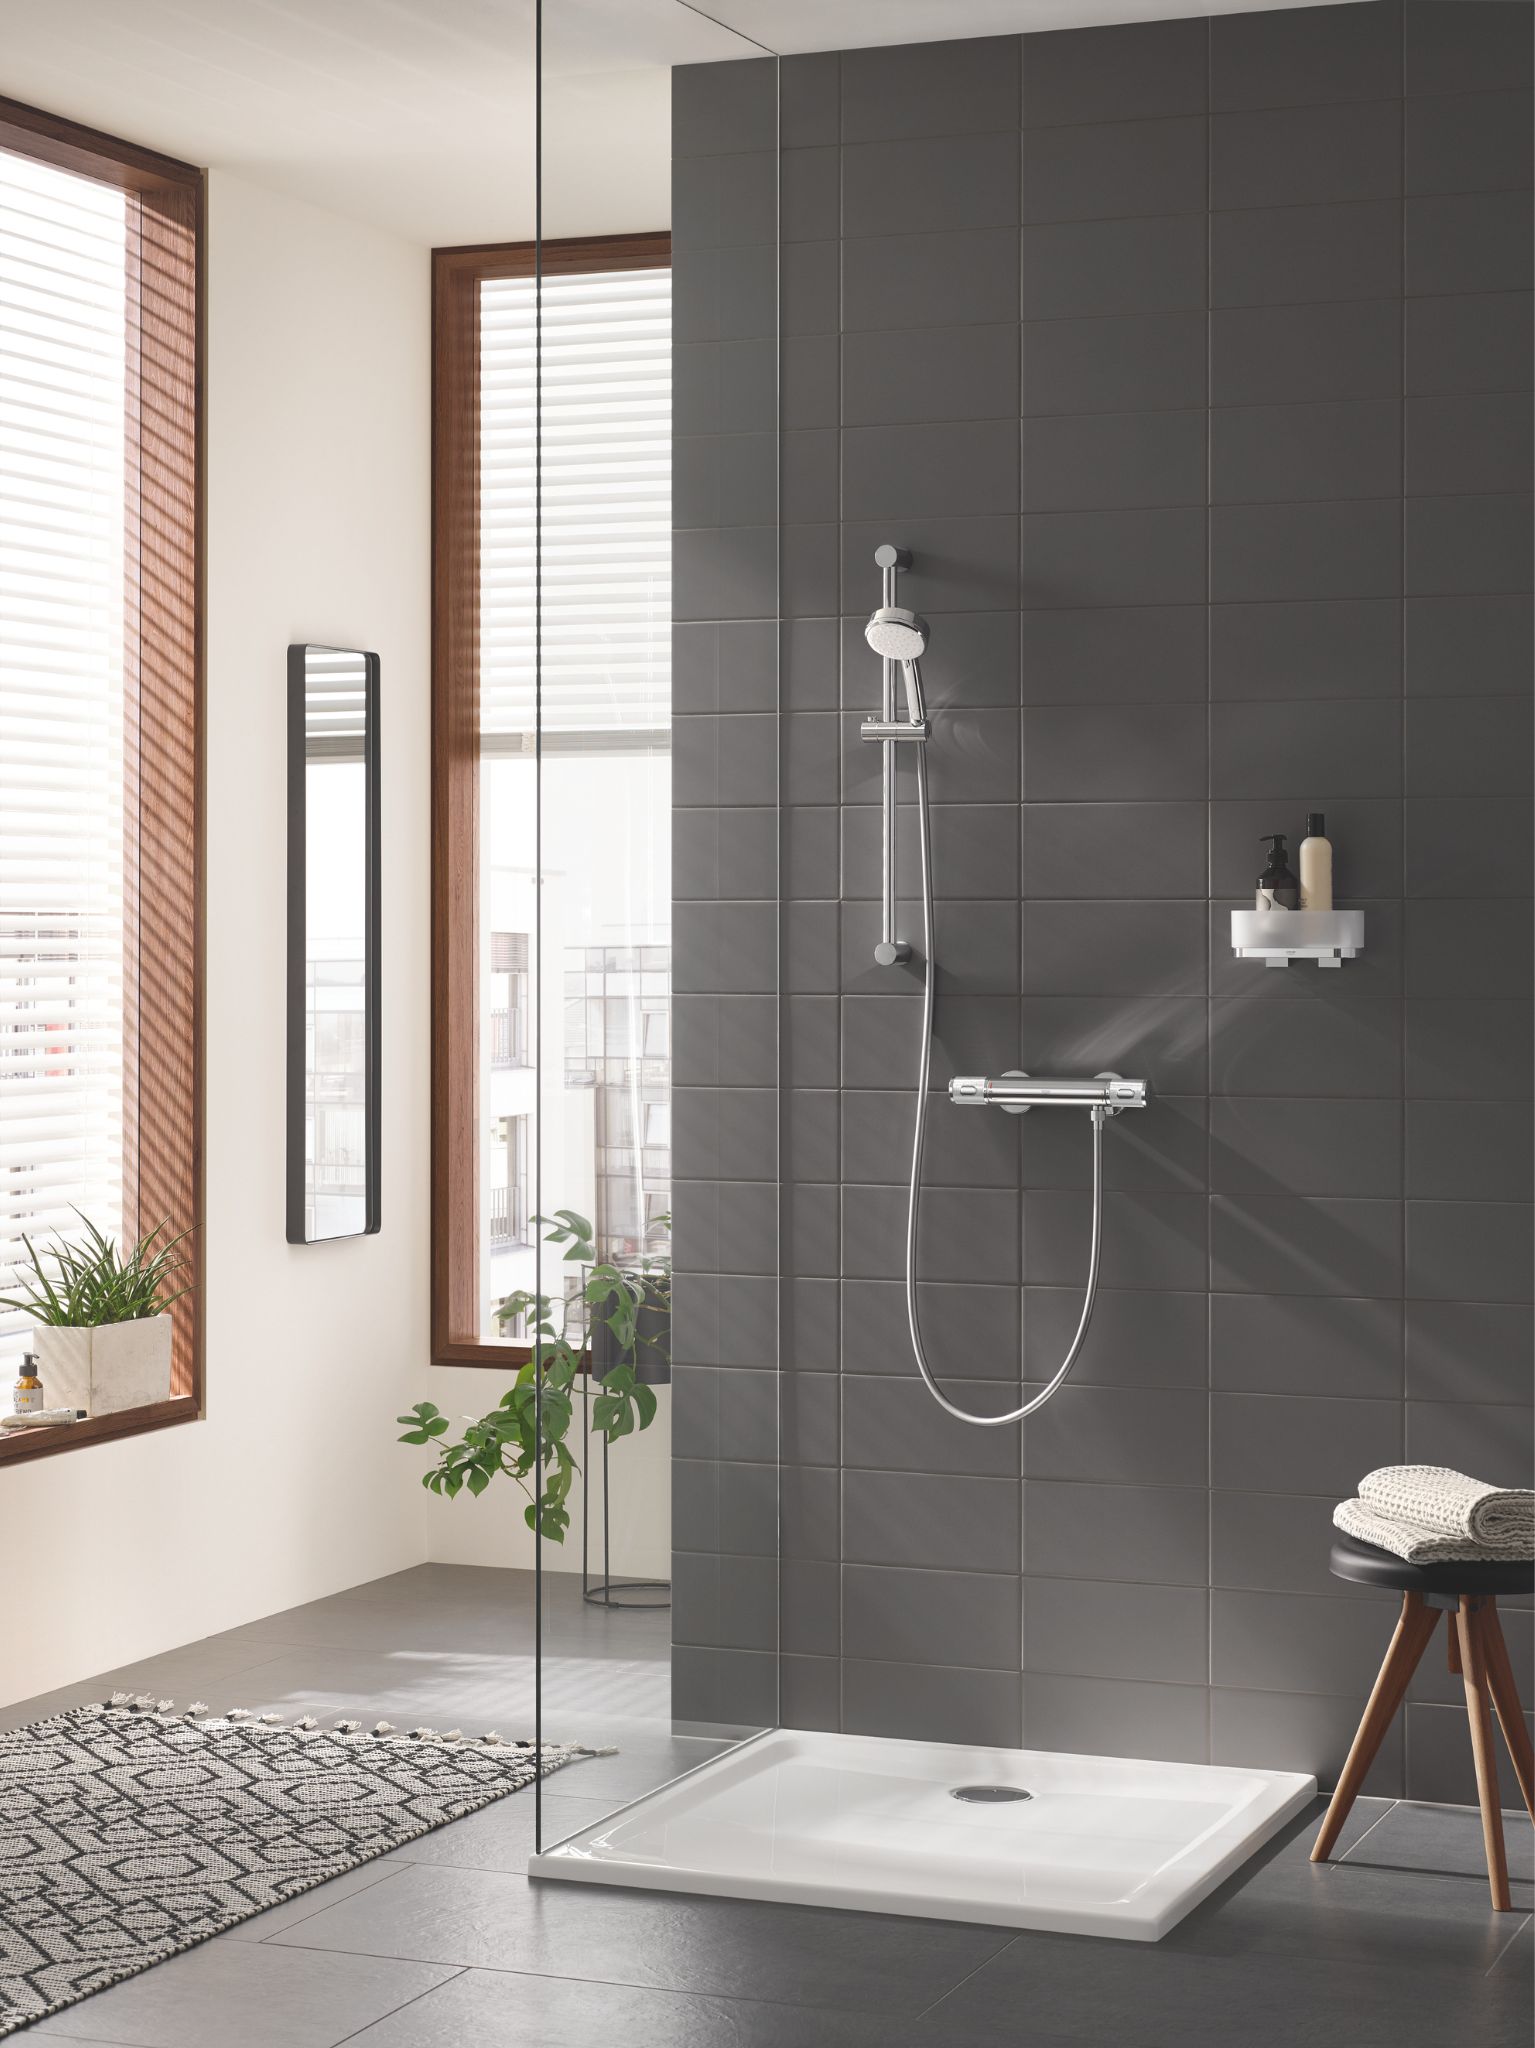 EPDs products, GROHE Discloses Ecological Impact of Products with the Release of Environmental Product Declarations